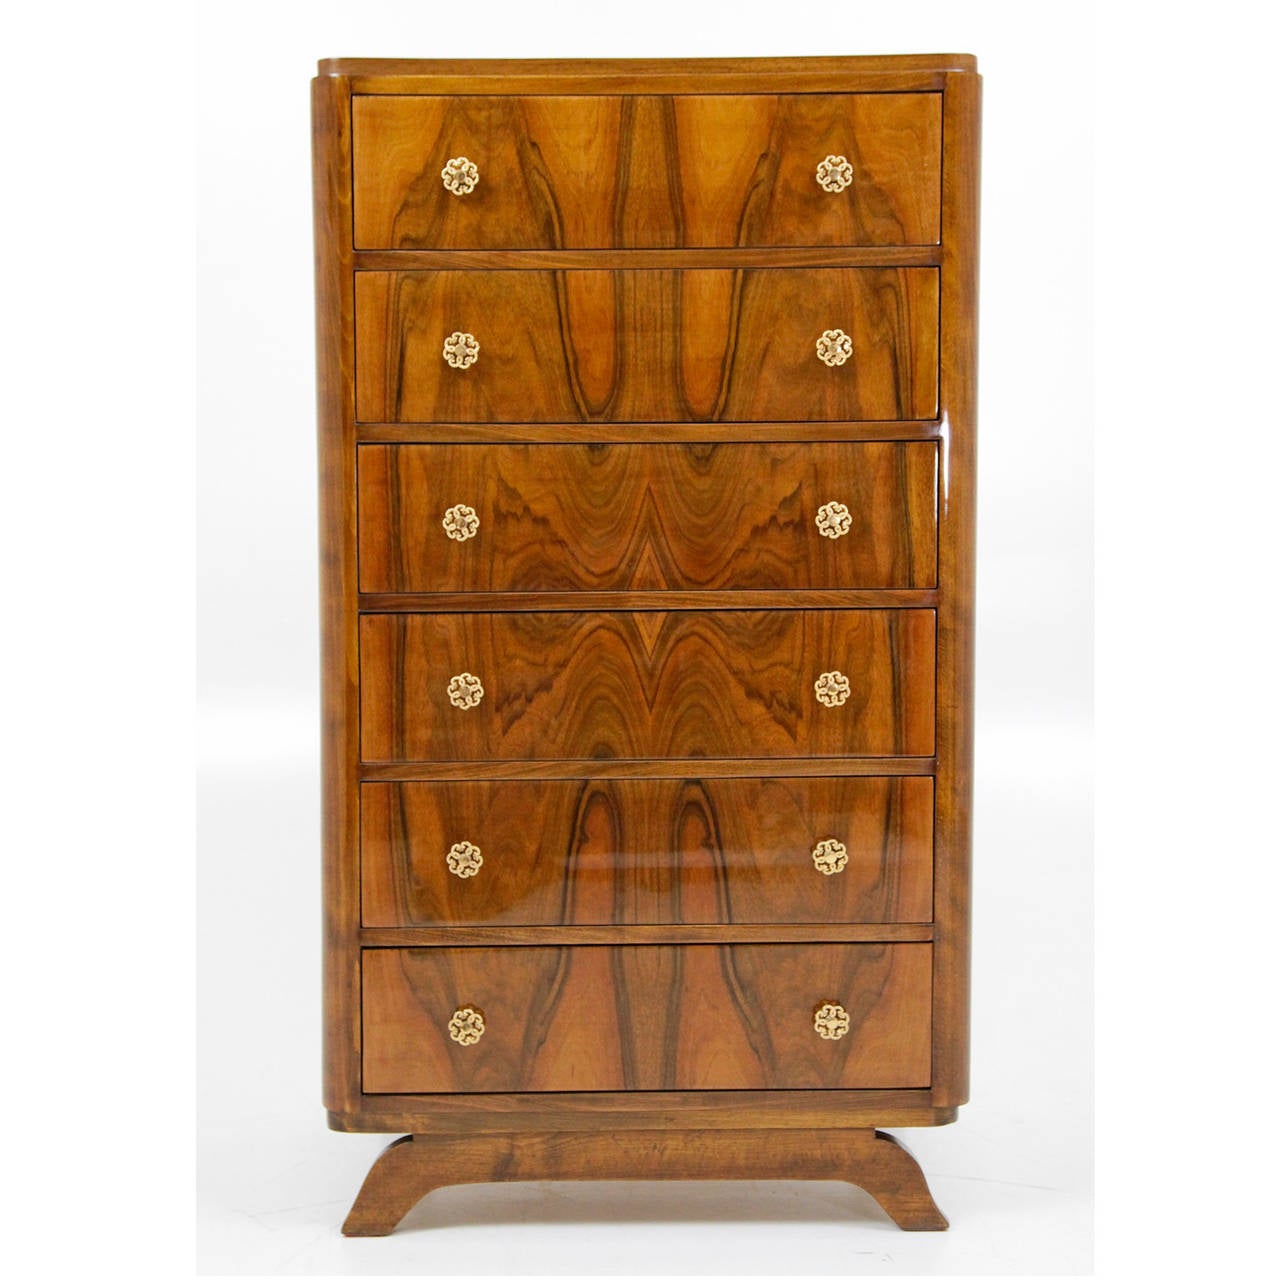 Very beautiful french Art Deco Chest of Drawers, circa 1940´s, walnut veneer with fantastic wood grain.